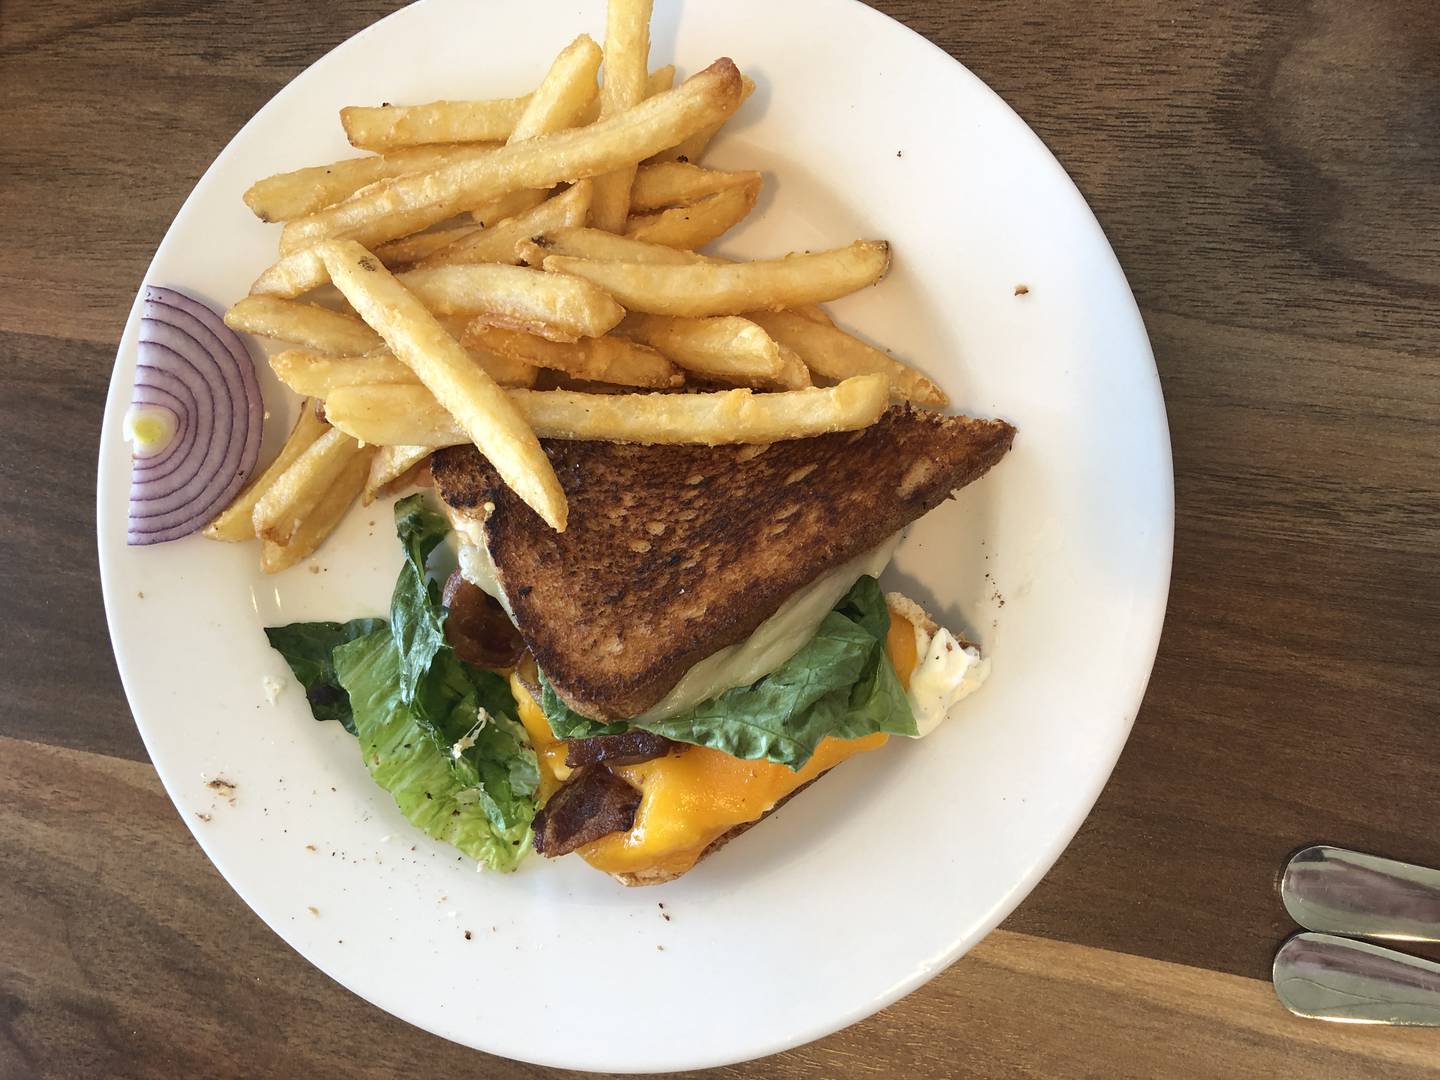 The “Grown Up” grilled cheese at the Ironwood Grille in McHenry was half-gone before the photo was taken.